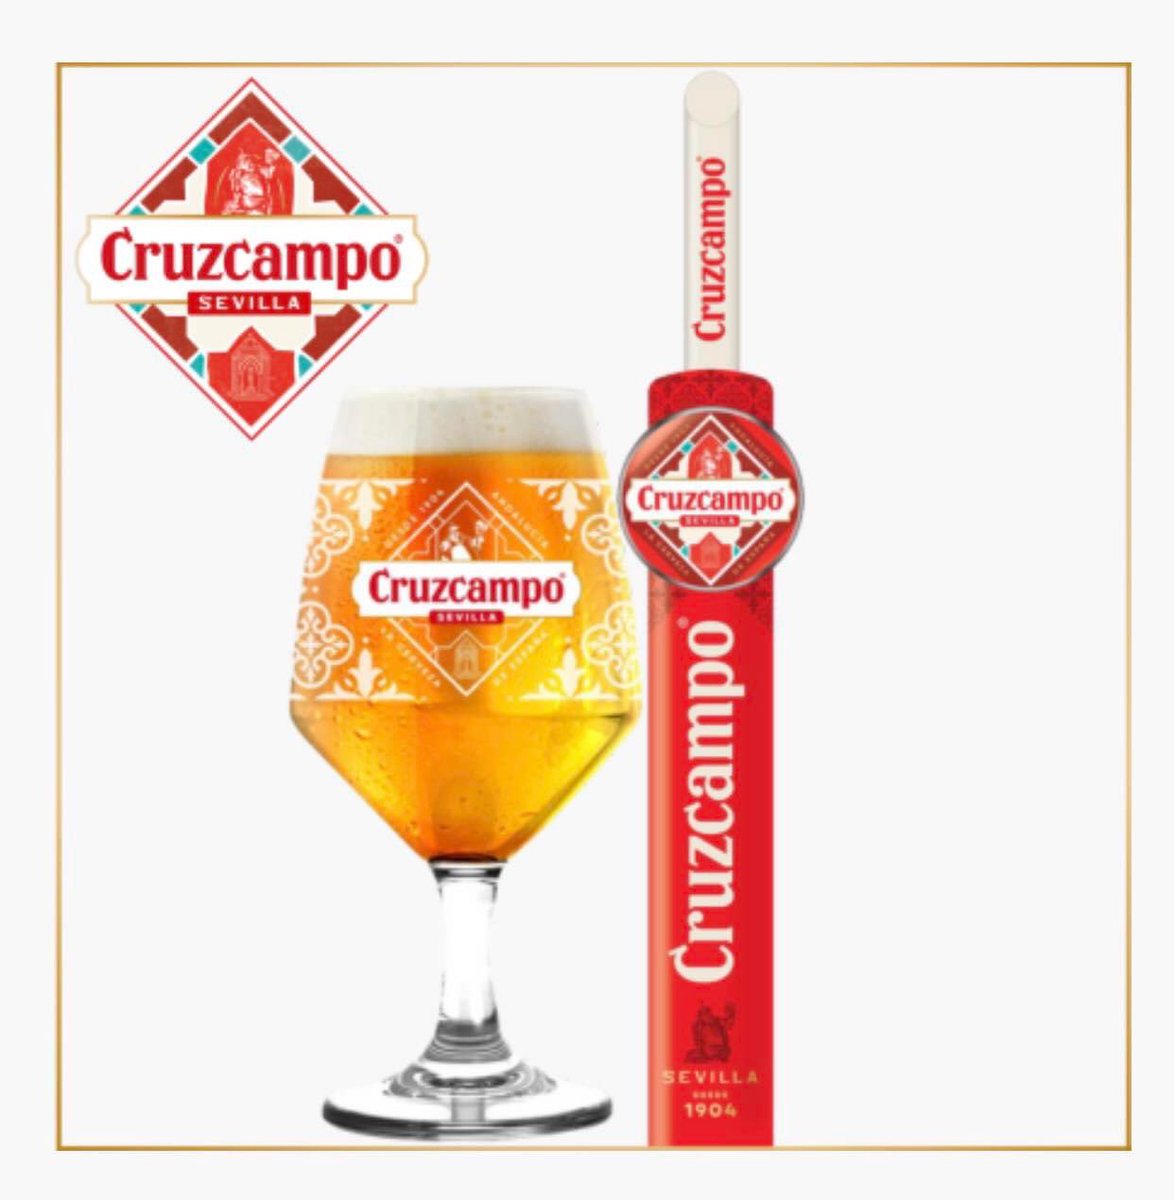 We are now serving Cruzcampo, A premium Spanish 4.4% lager. £4.30 a pint Friday to Sunday and only £3.70 a pint Monday until Thursday